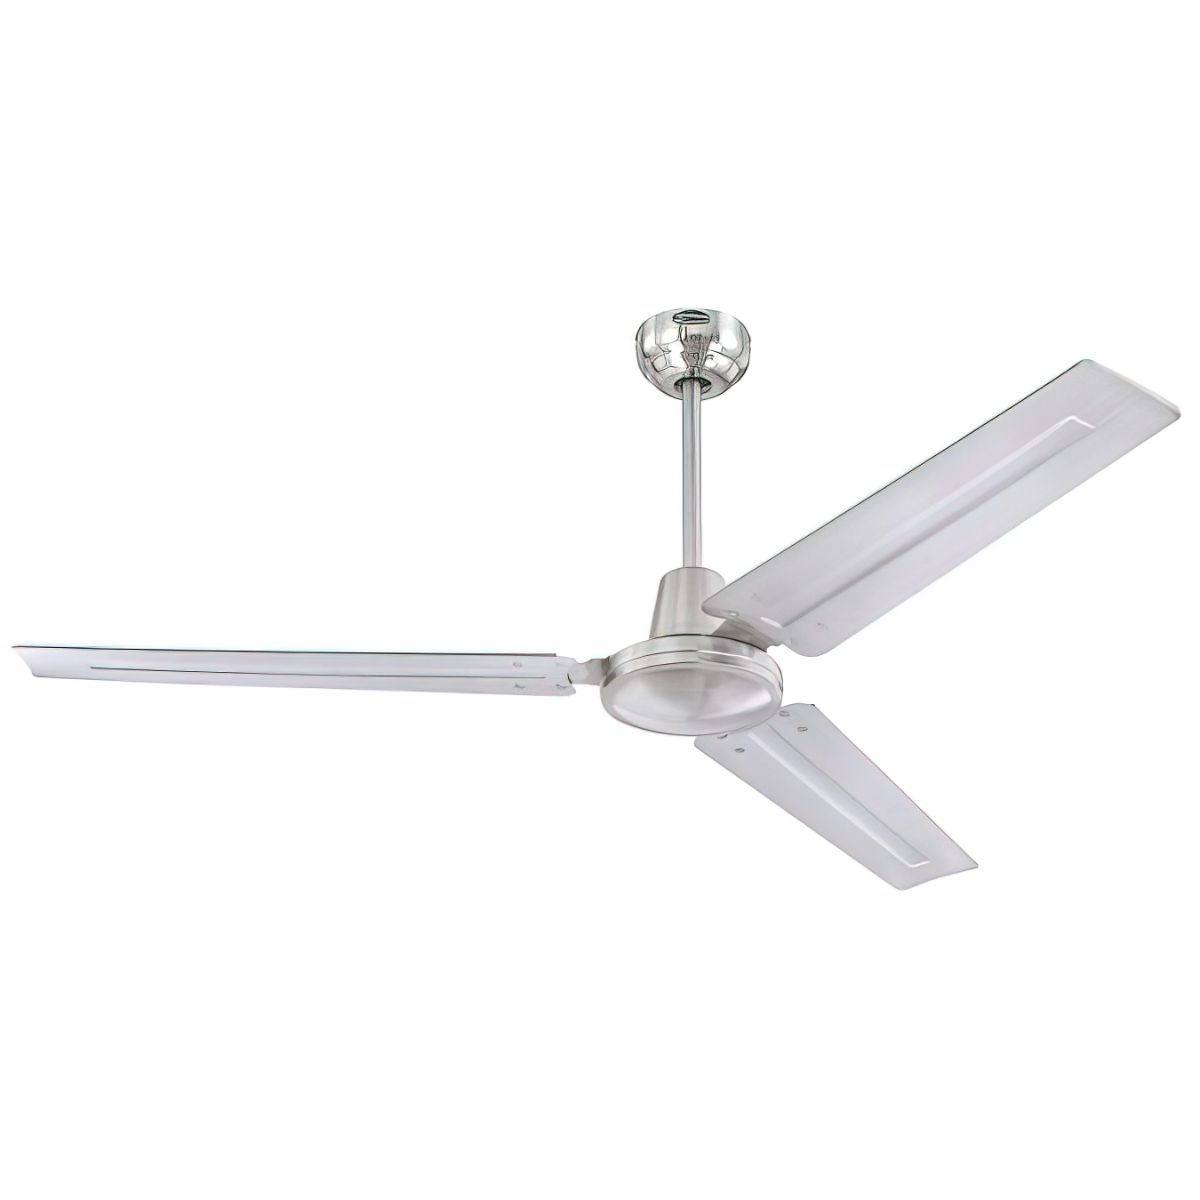 Jax 56 Inch Large Industrial Ceiling Fan With Remote